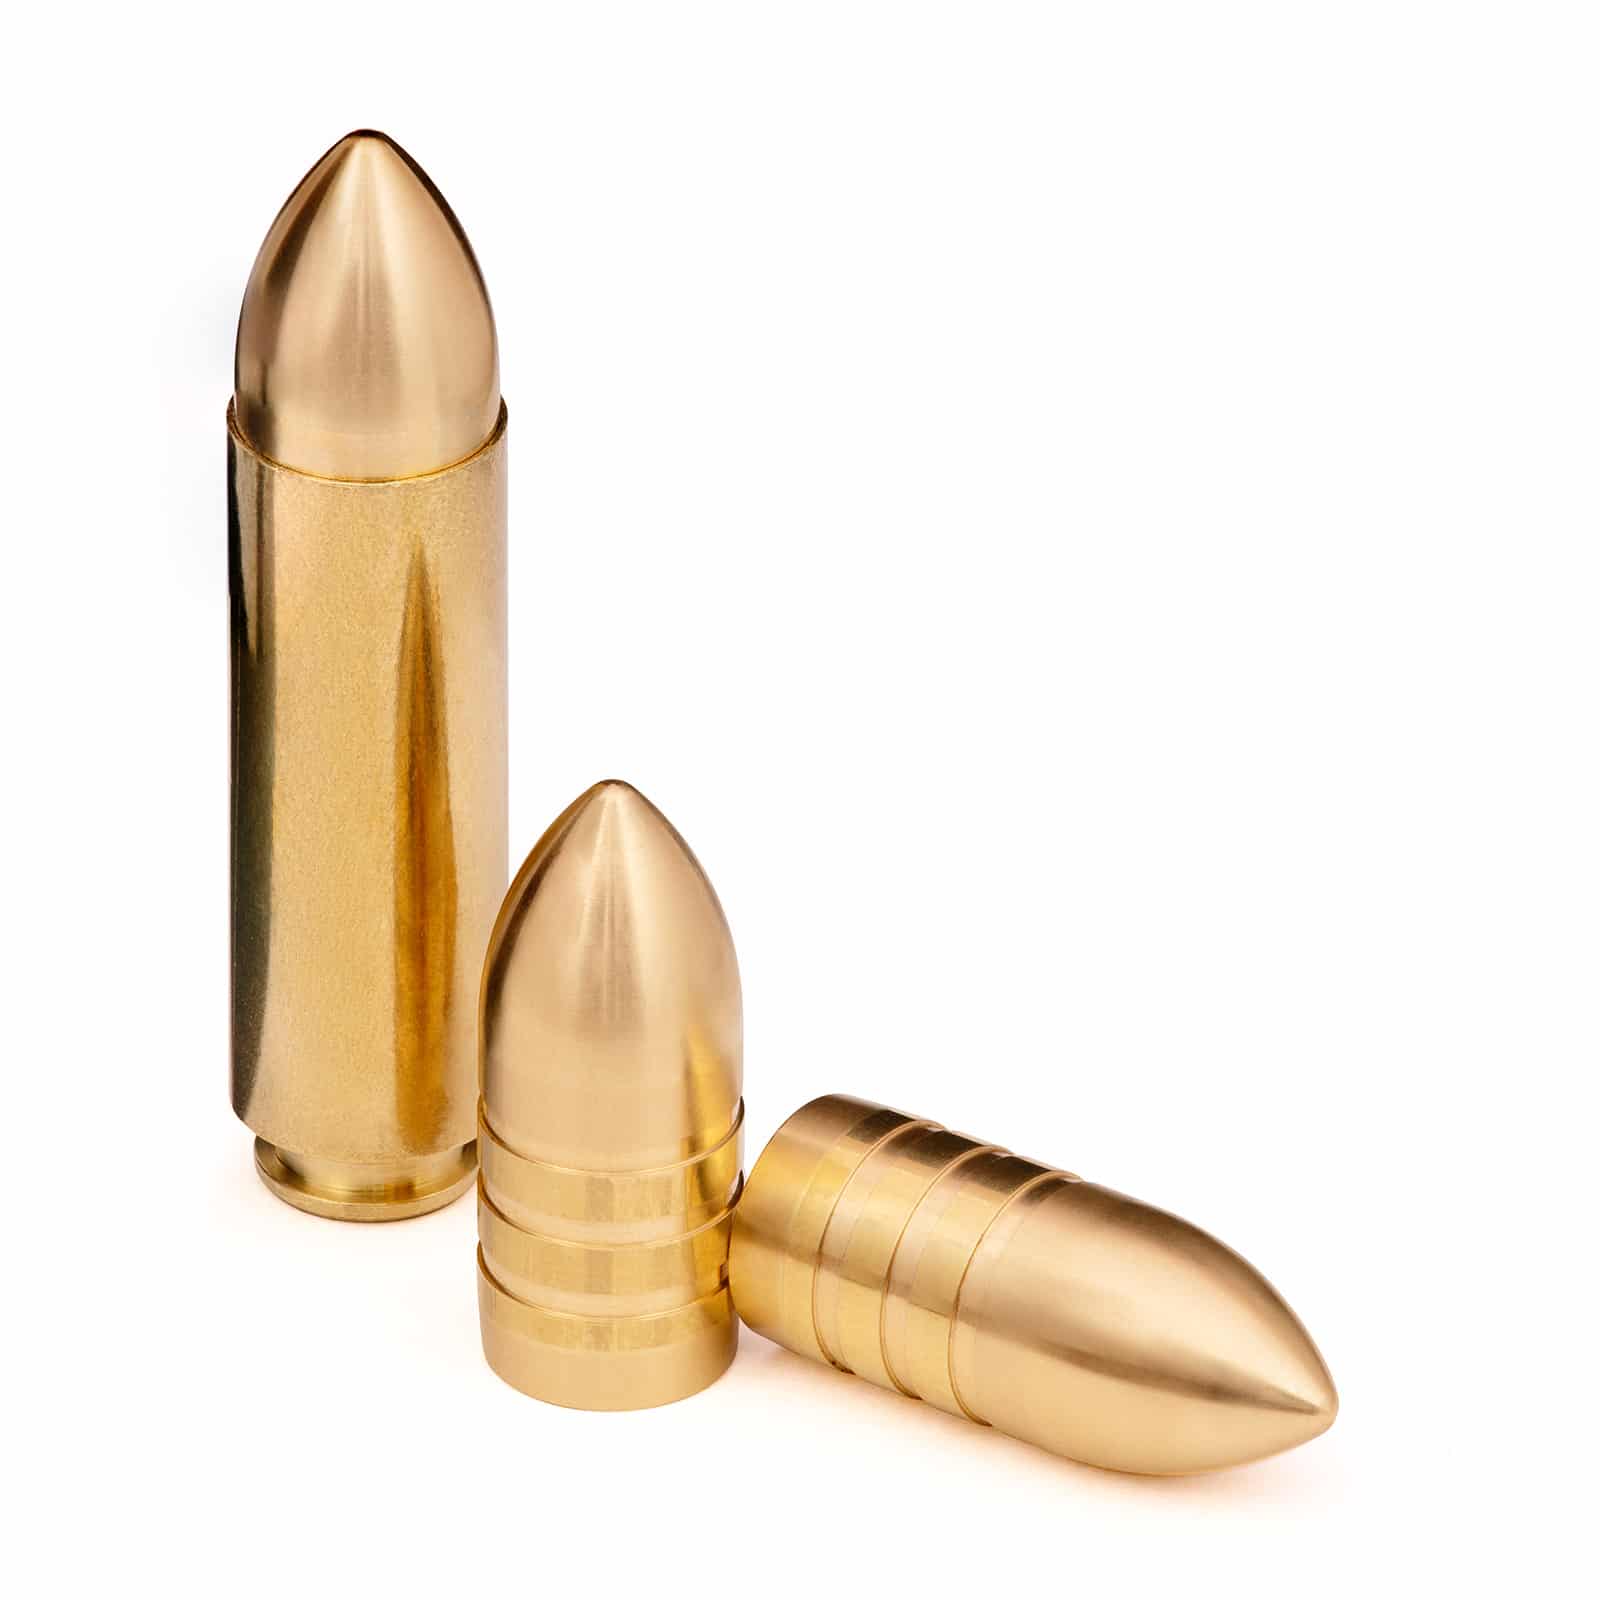 22 Magnum Empty Bullet Shell Casings, Brass or Nickel, Wet-Tumbled